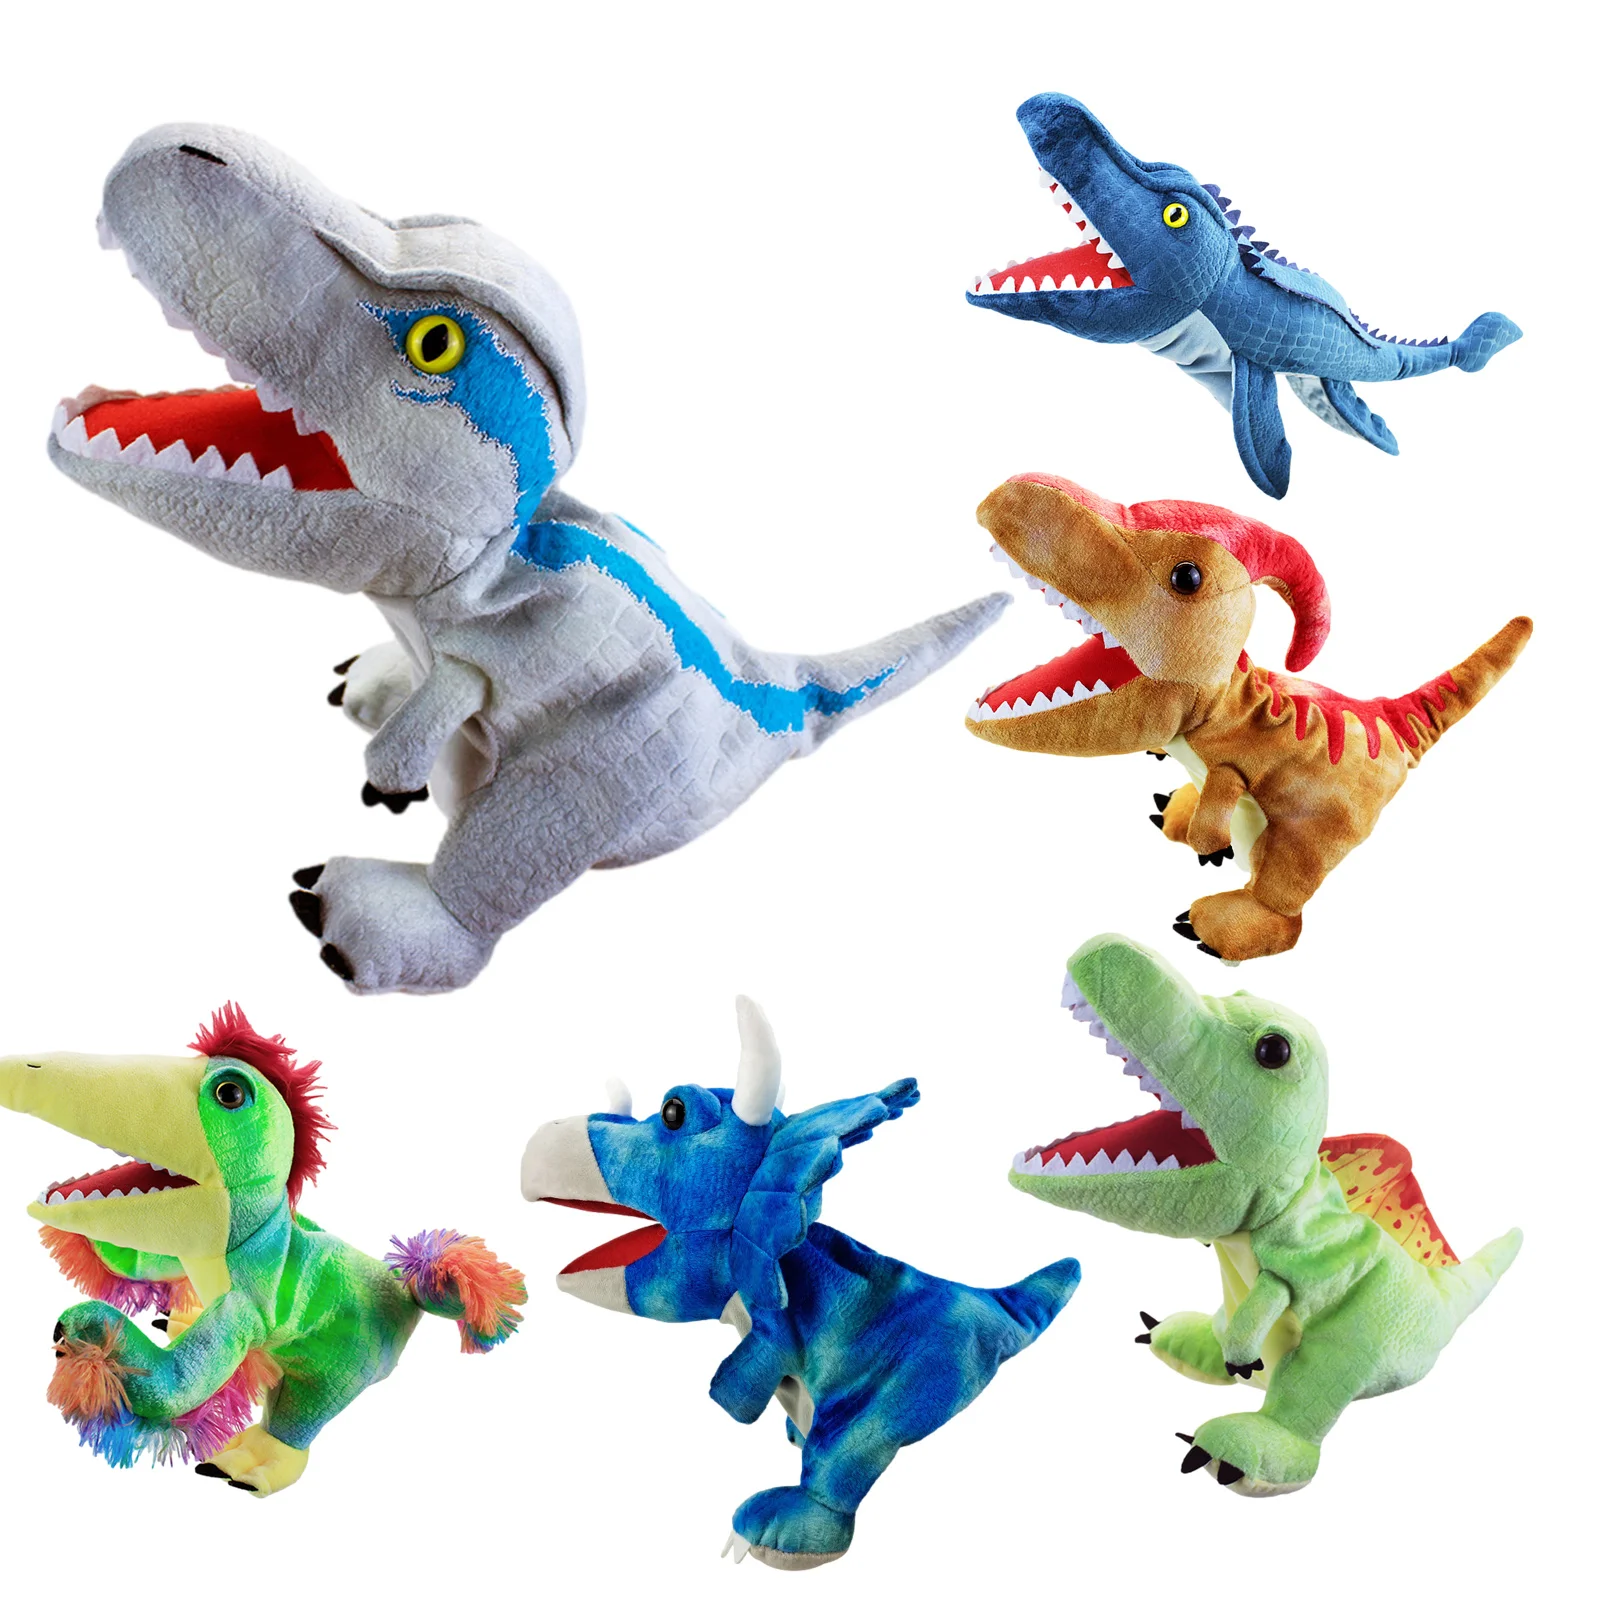 Dinosaur Hand Puppet Toys Raptor Puppet Open Mouth Tyrannosaurus Rex Dinosaur Doll Kids Hand Puppets Toys Children Birthday Gift kidami alloy 1 32 ford raptor f150 truck model car diecast vehicle off road suv kids toy car for boys children gifts collection